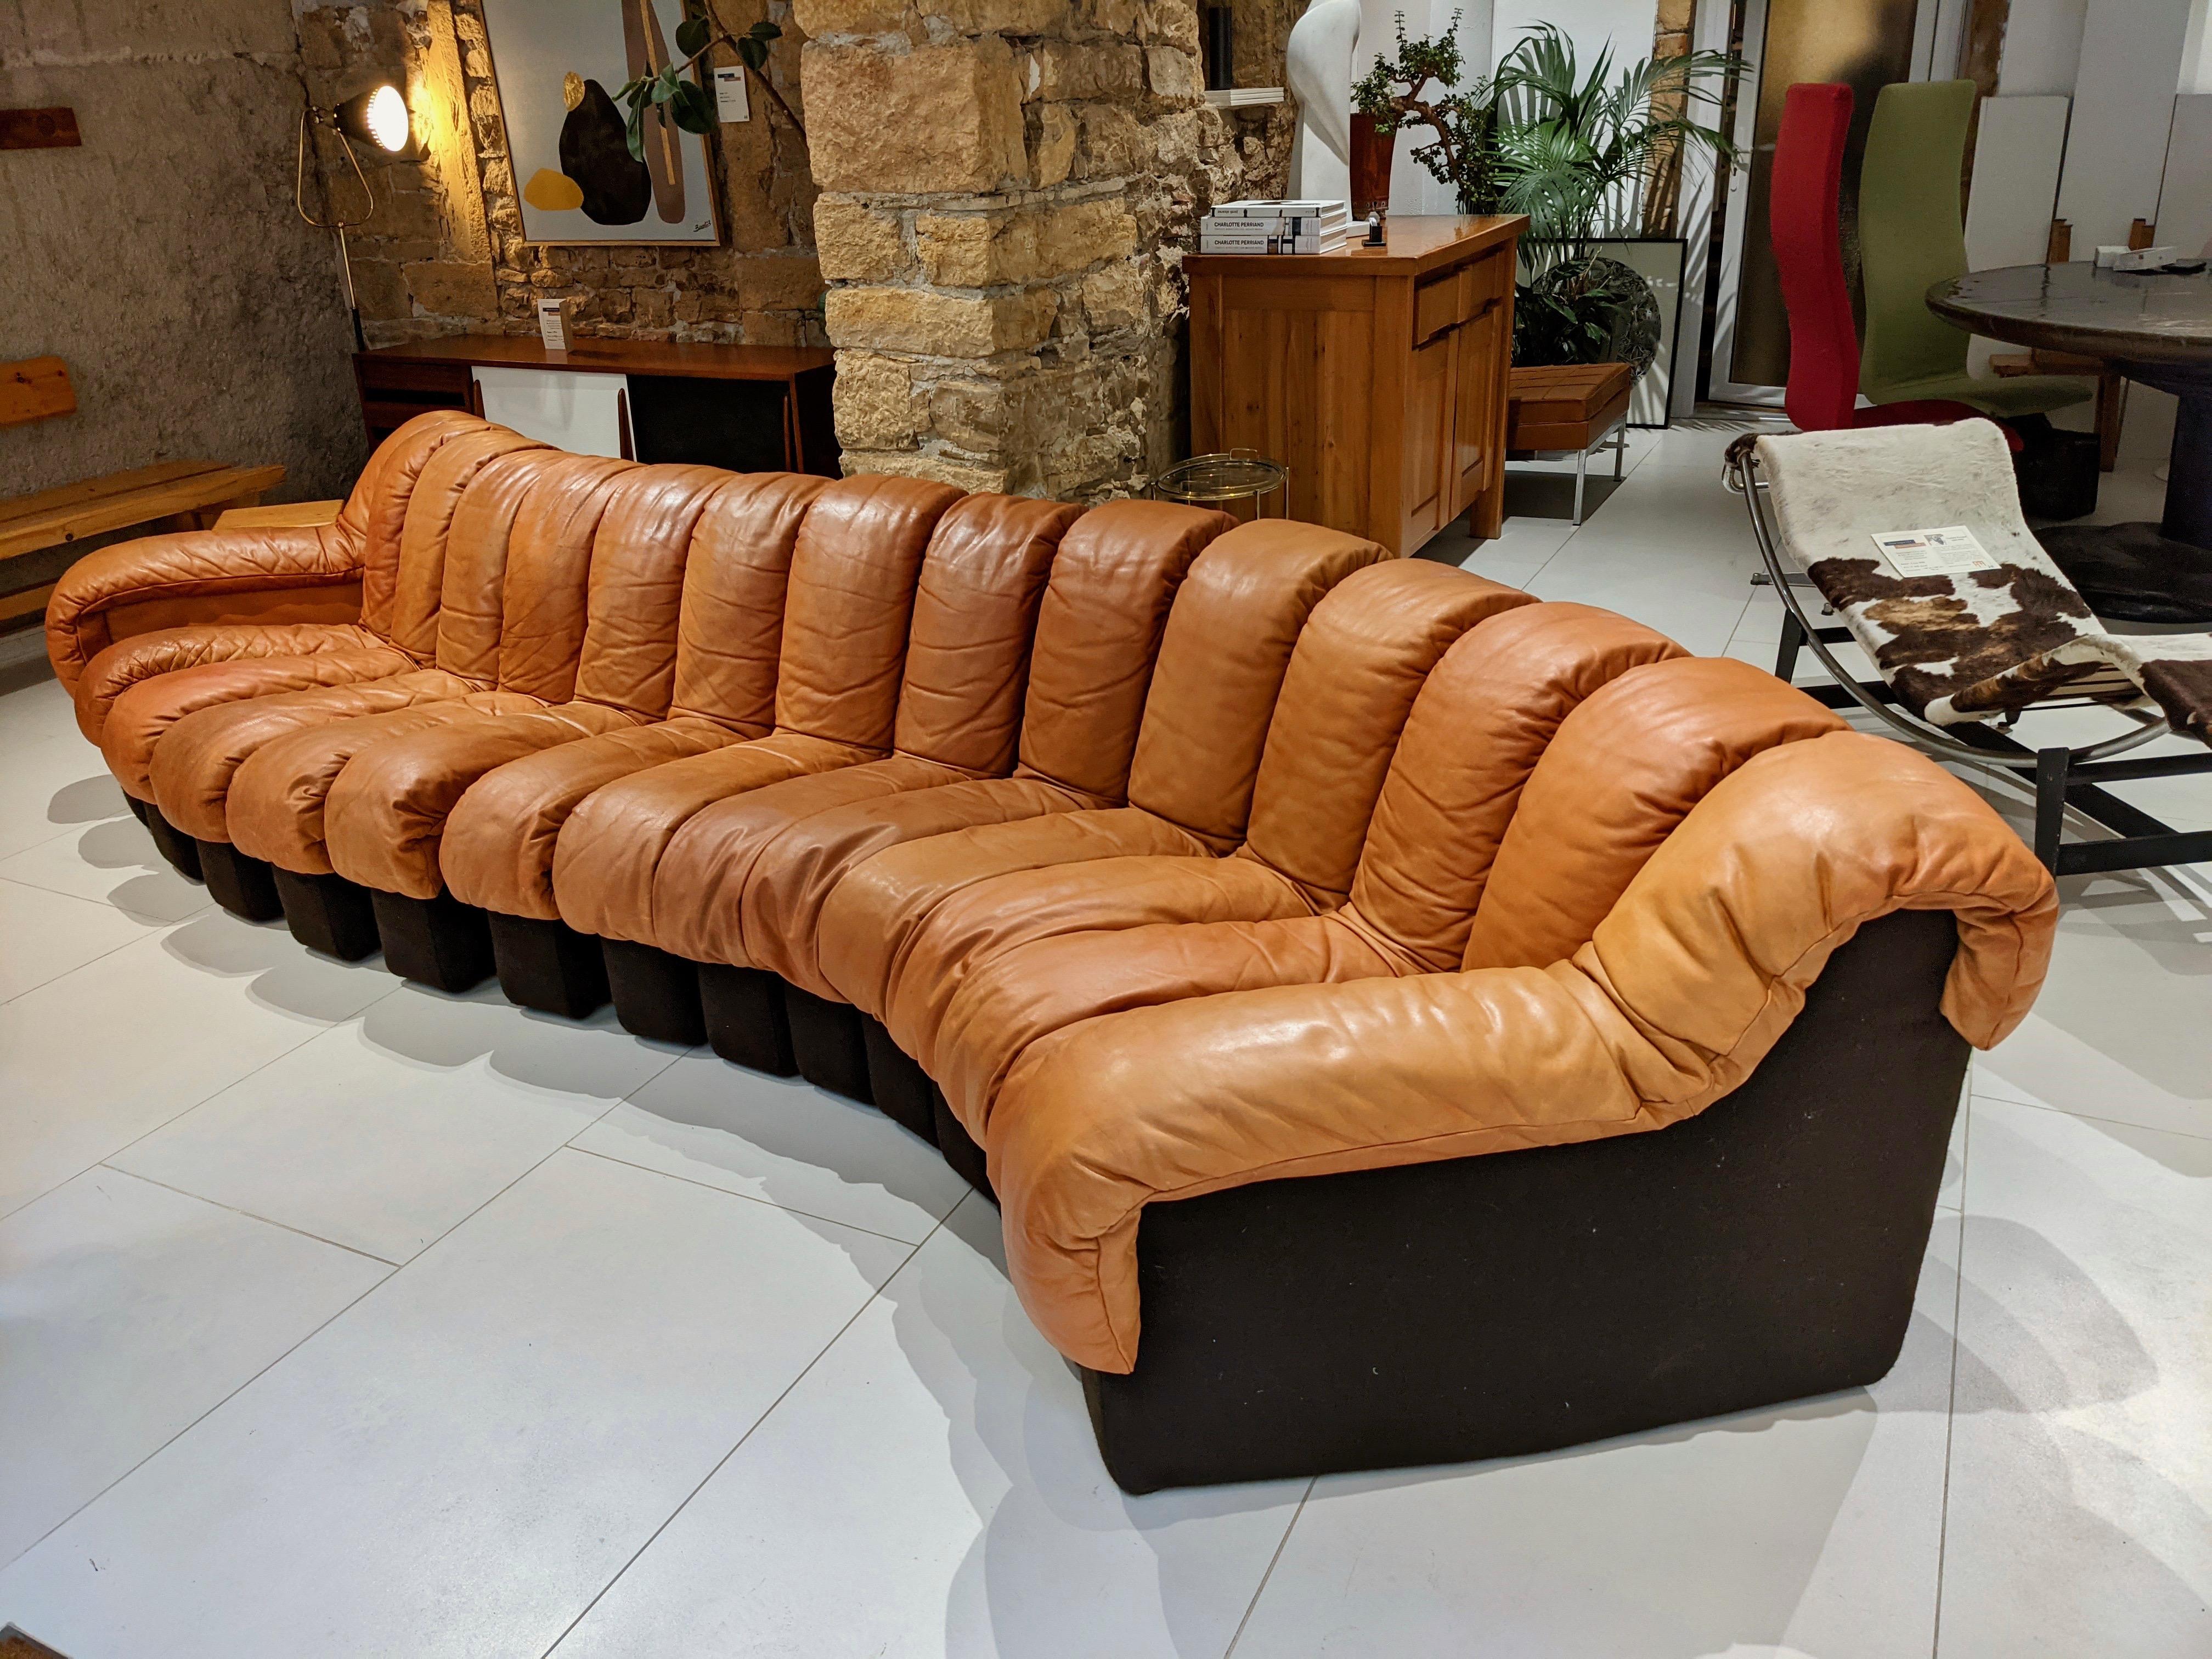 Modular sofa DS-600 by Berger, Peduzzi, Vogt & Ulrich for de Sede. Circa 1970. Camel coloured leather. Good condition. The sofa has some wear and tear visible in the picture. Some restorations have been done on one of the armrests and on the bottom